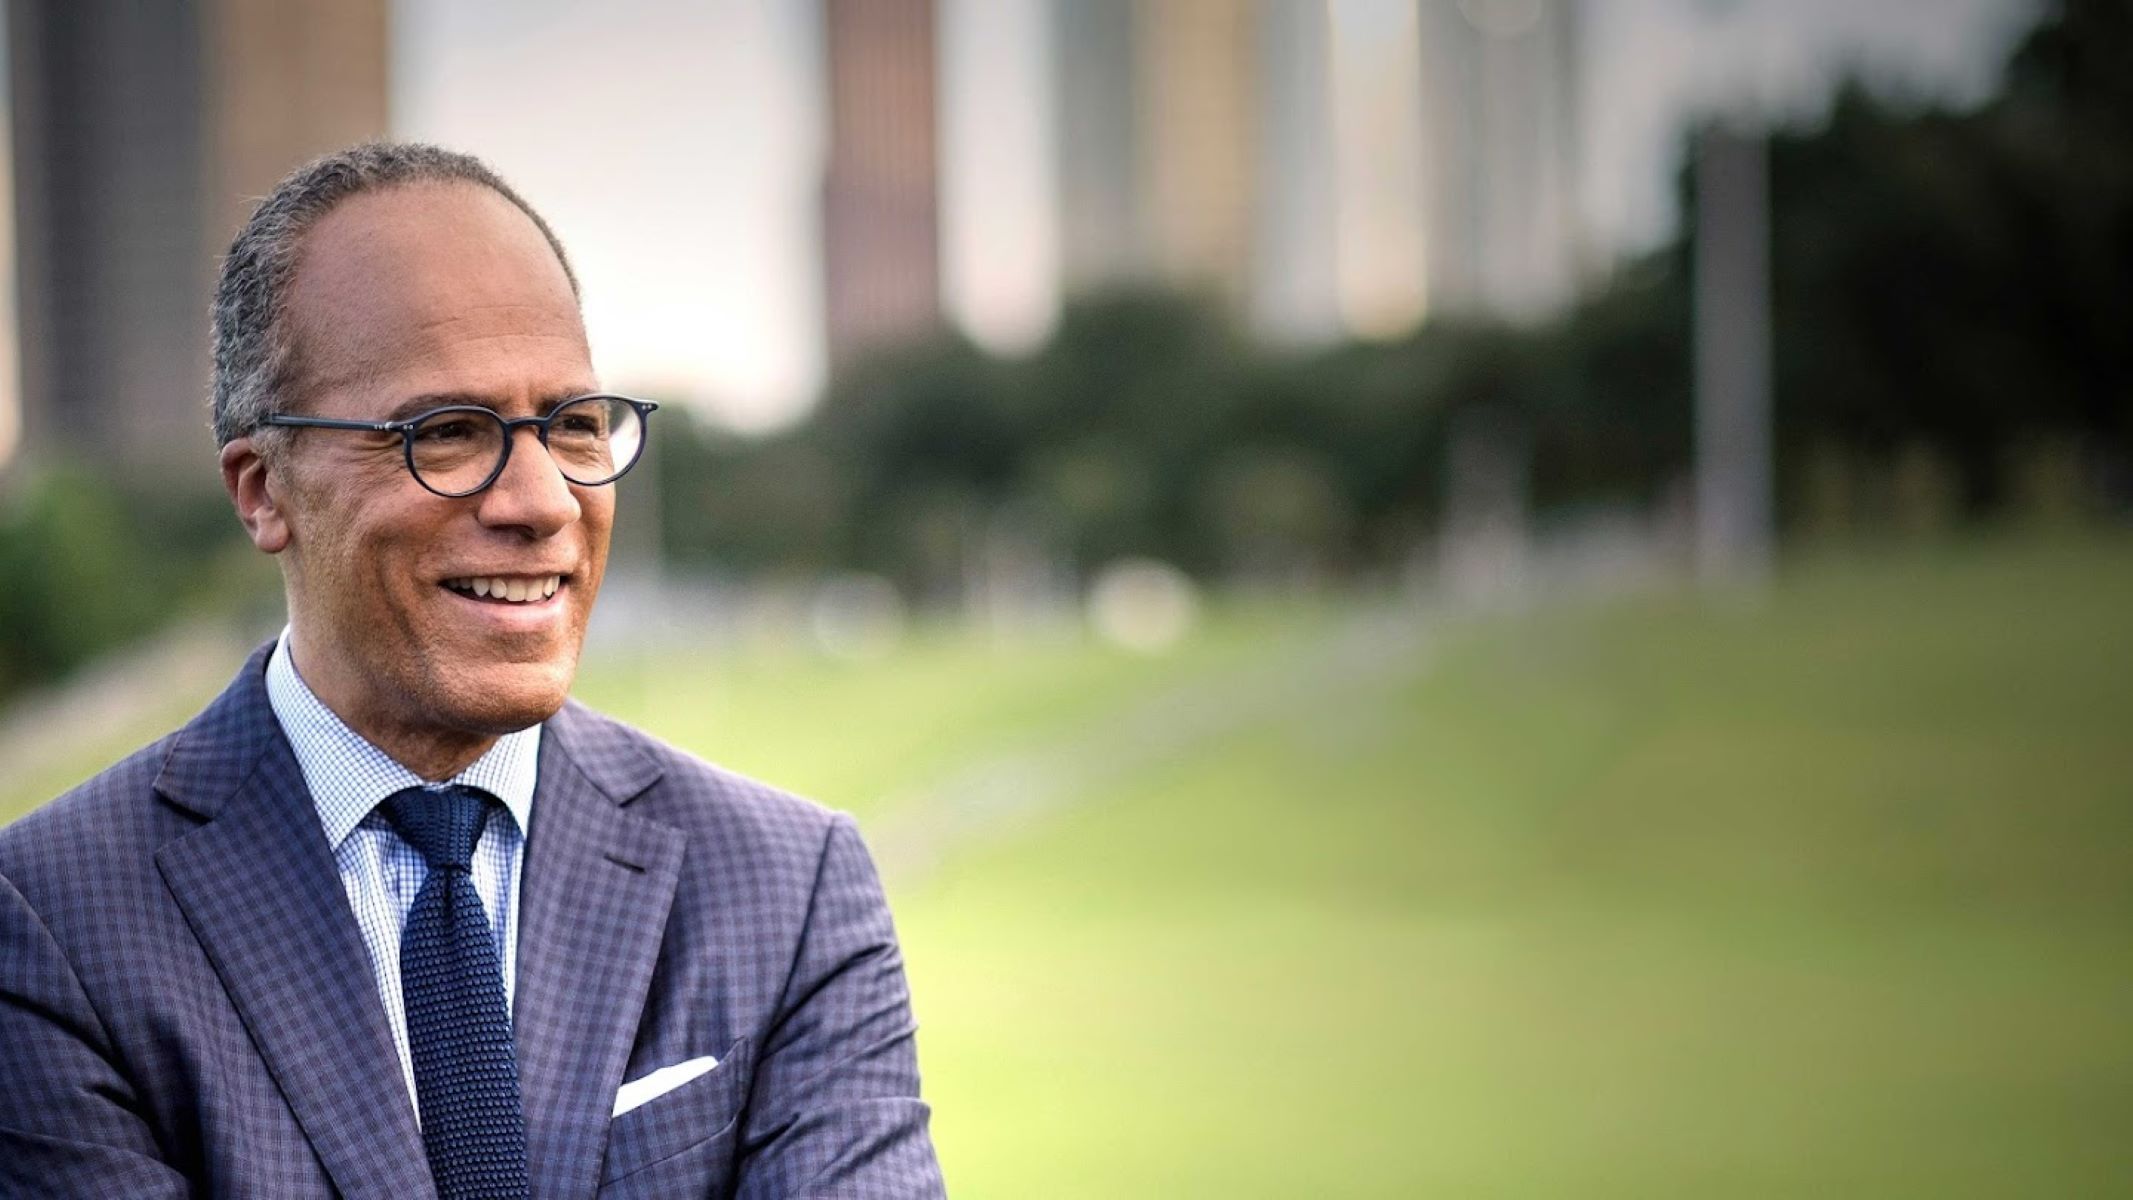 How To Watch Lester Holt Live